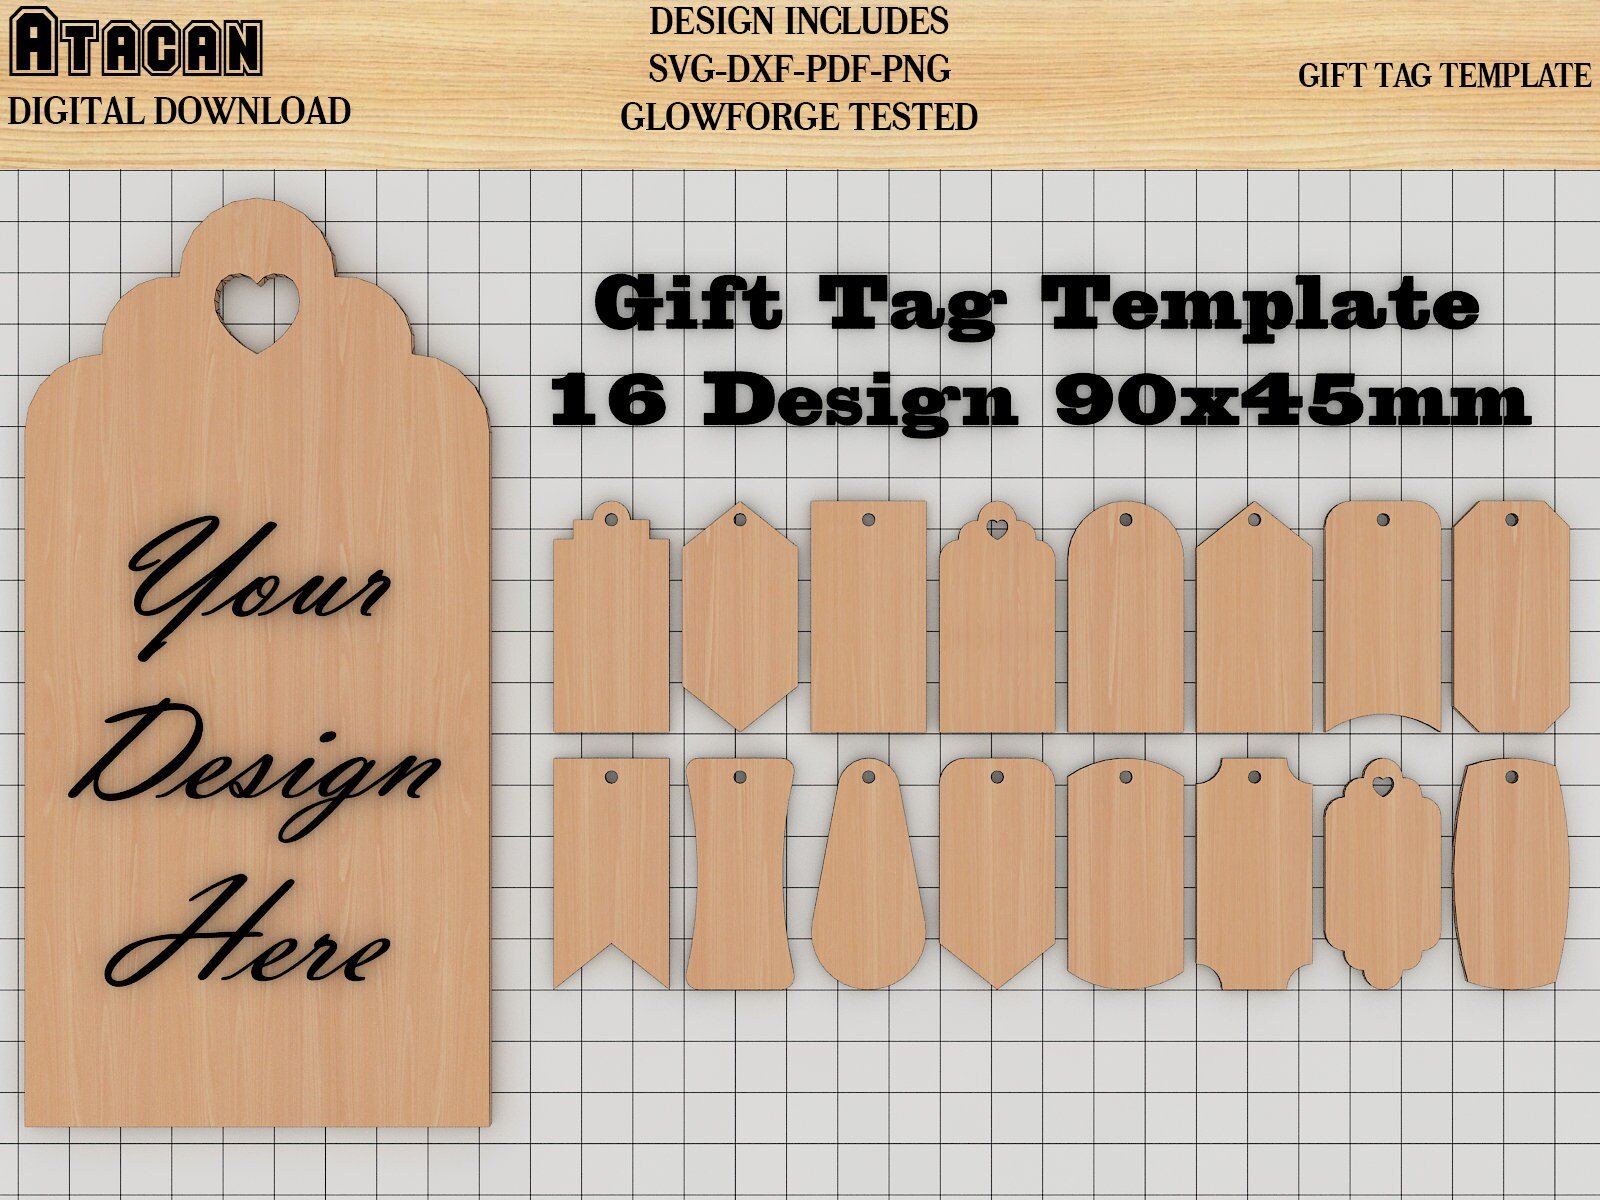 Gift Tag Laser cut Templates 16 Design, Gift Labels Tags Template SVG, PDF, PNG, Dxf files 238